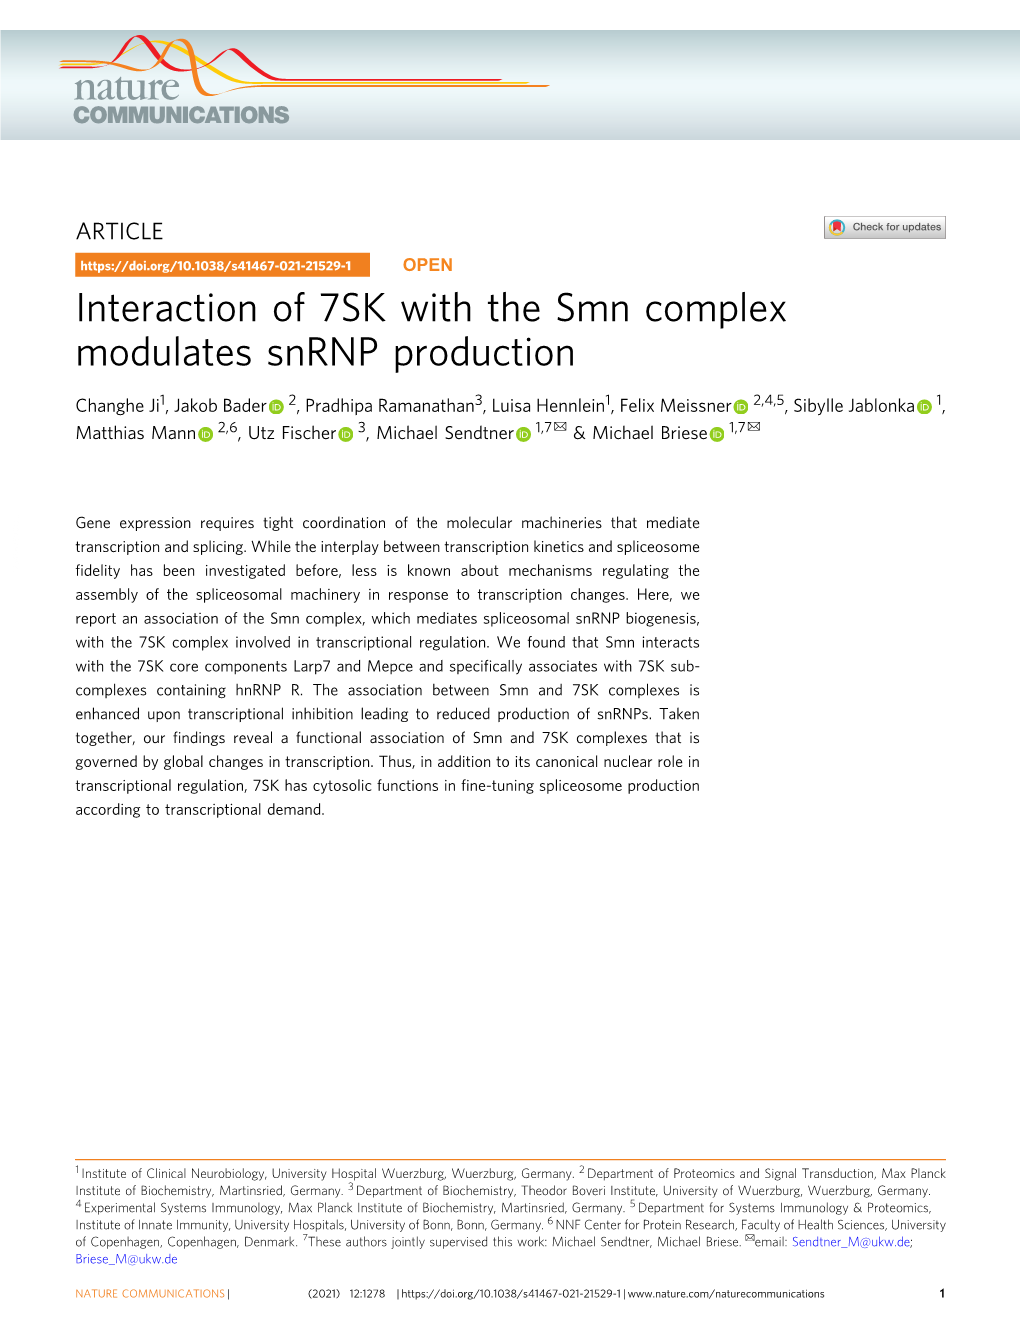 Interaction of 7SK with the Smn Complex Modulates Snrnp Production